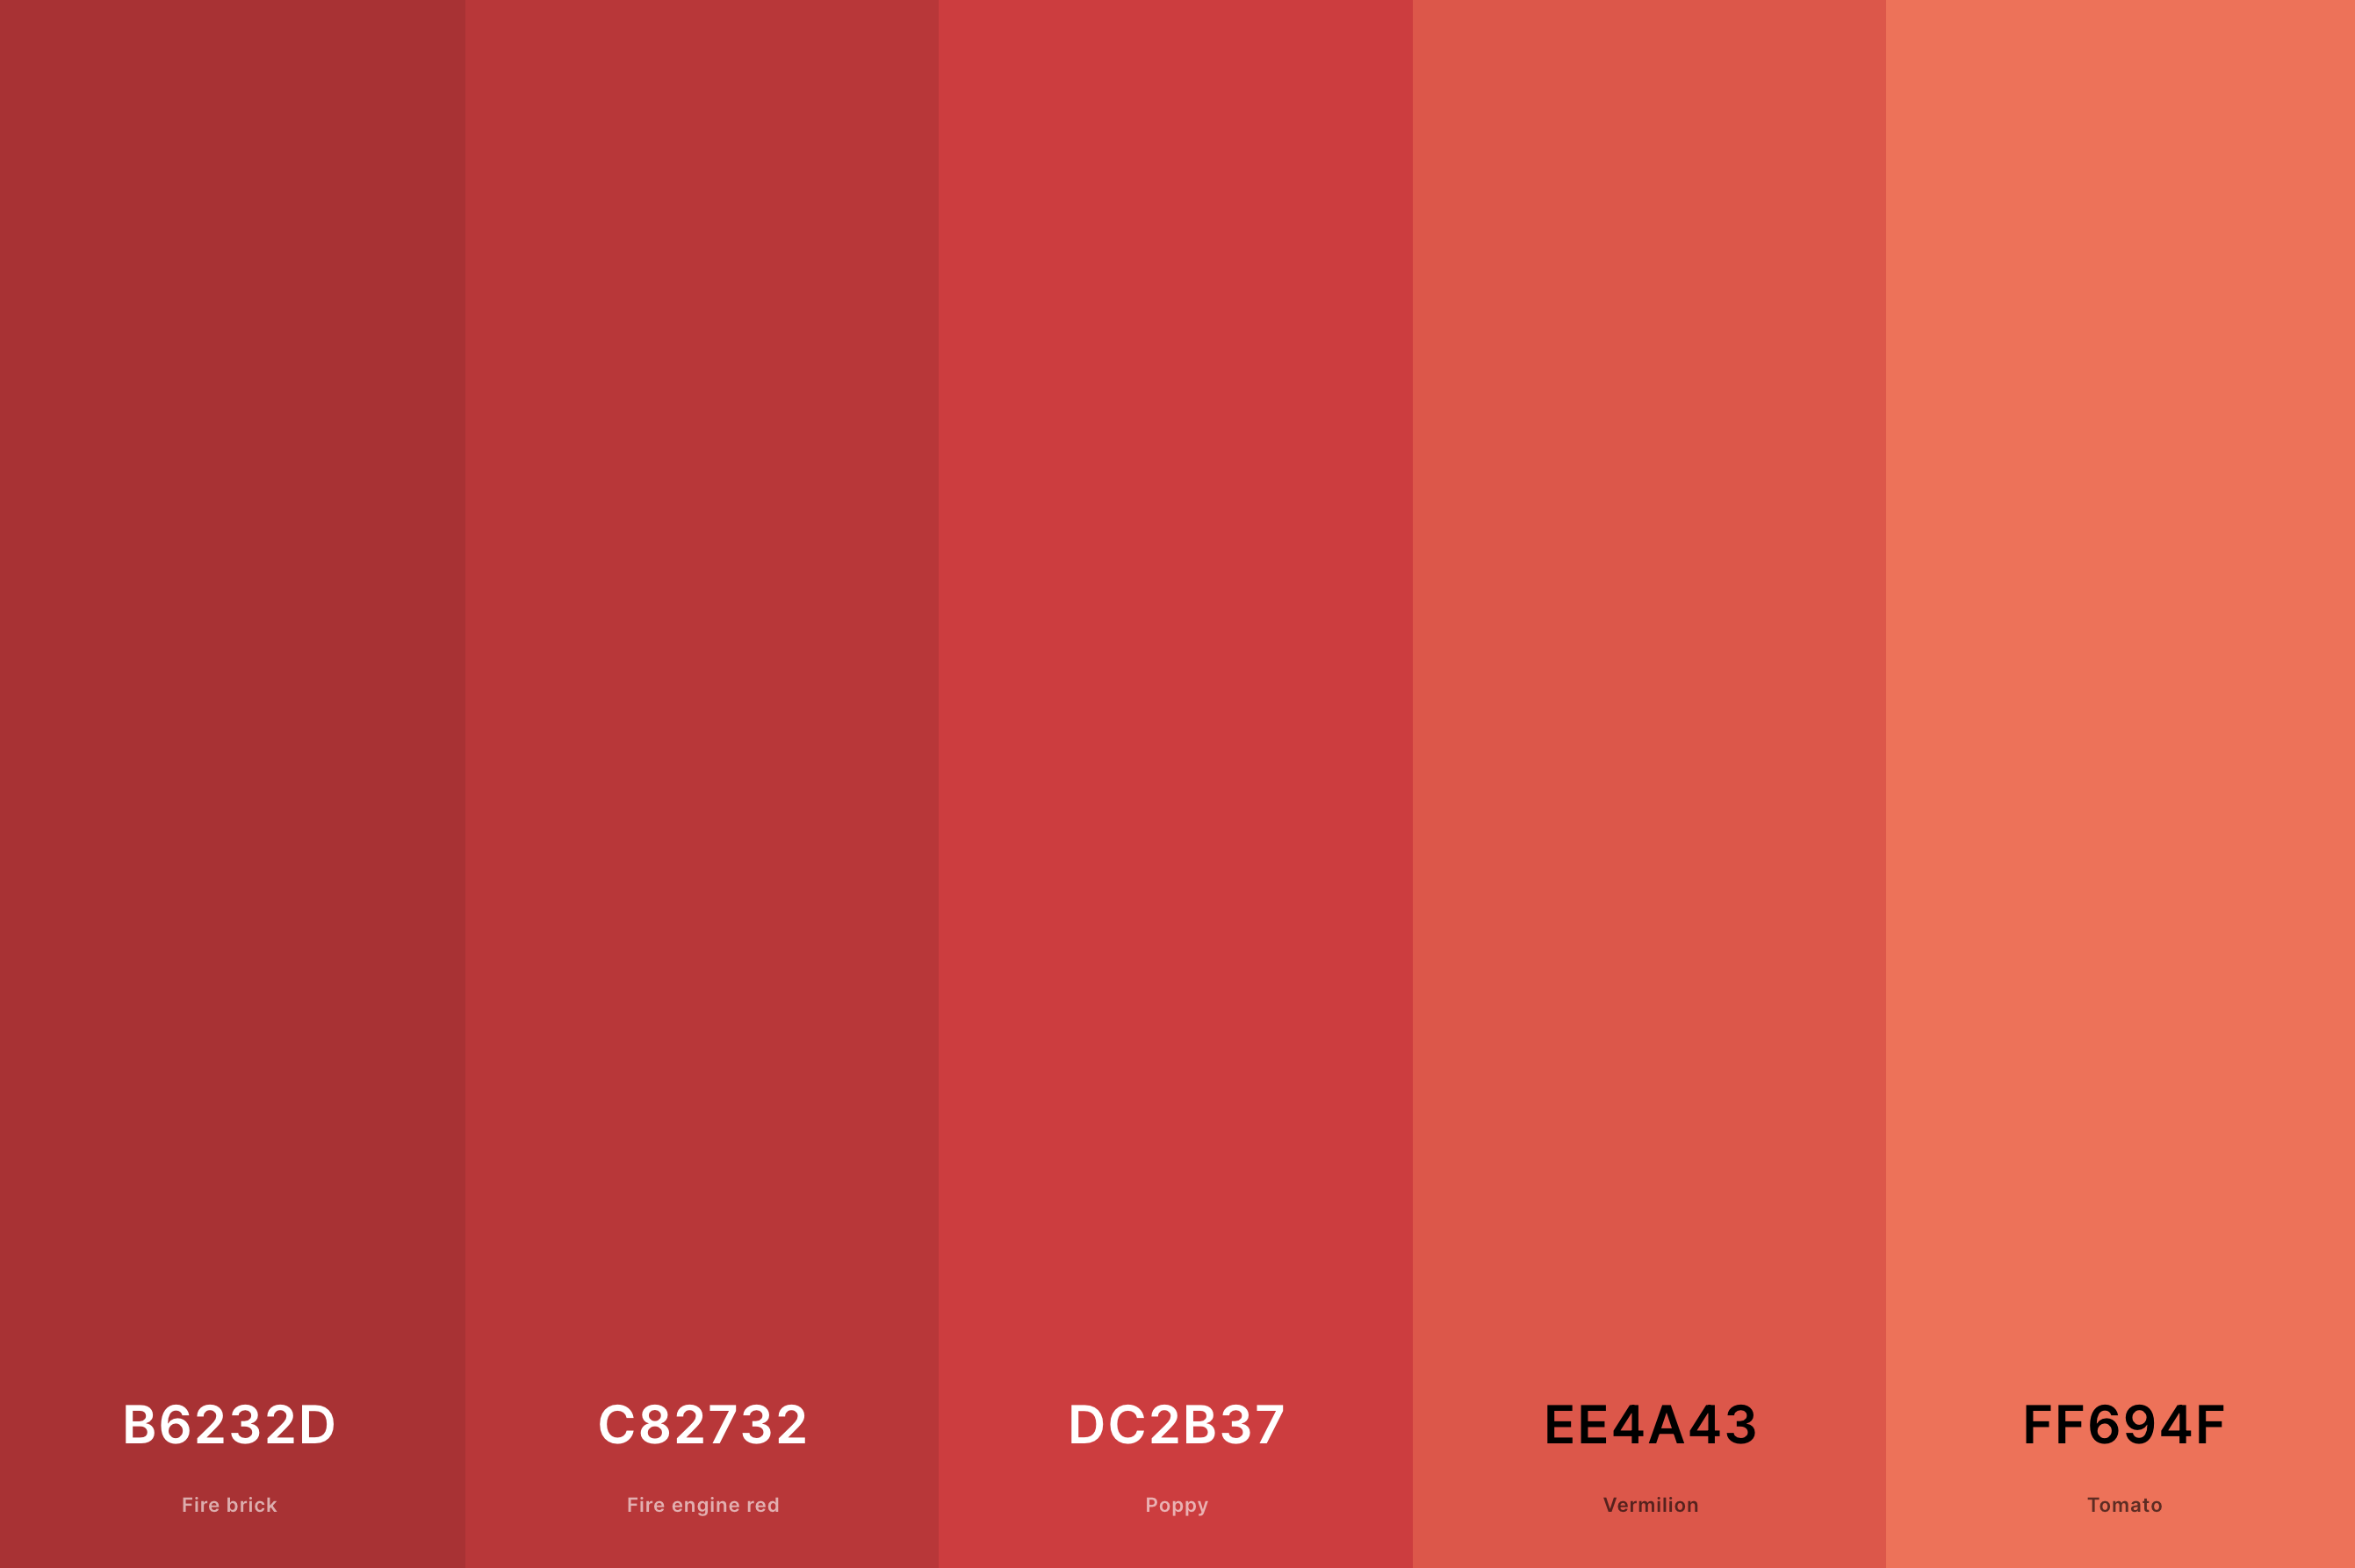 15. Coral And Red Color Palette Color Palette with Fire Brick (Hex #B6232D) + Fire Engine Red (Hex #C82732) + Poppy (Hex #DC2B37) + Vermilion (Hex #EE4A43) + Tomato (Hex #FF694F) Color Palette with Hex Codes